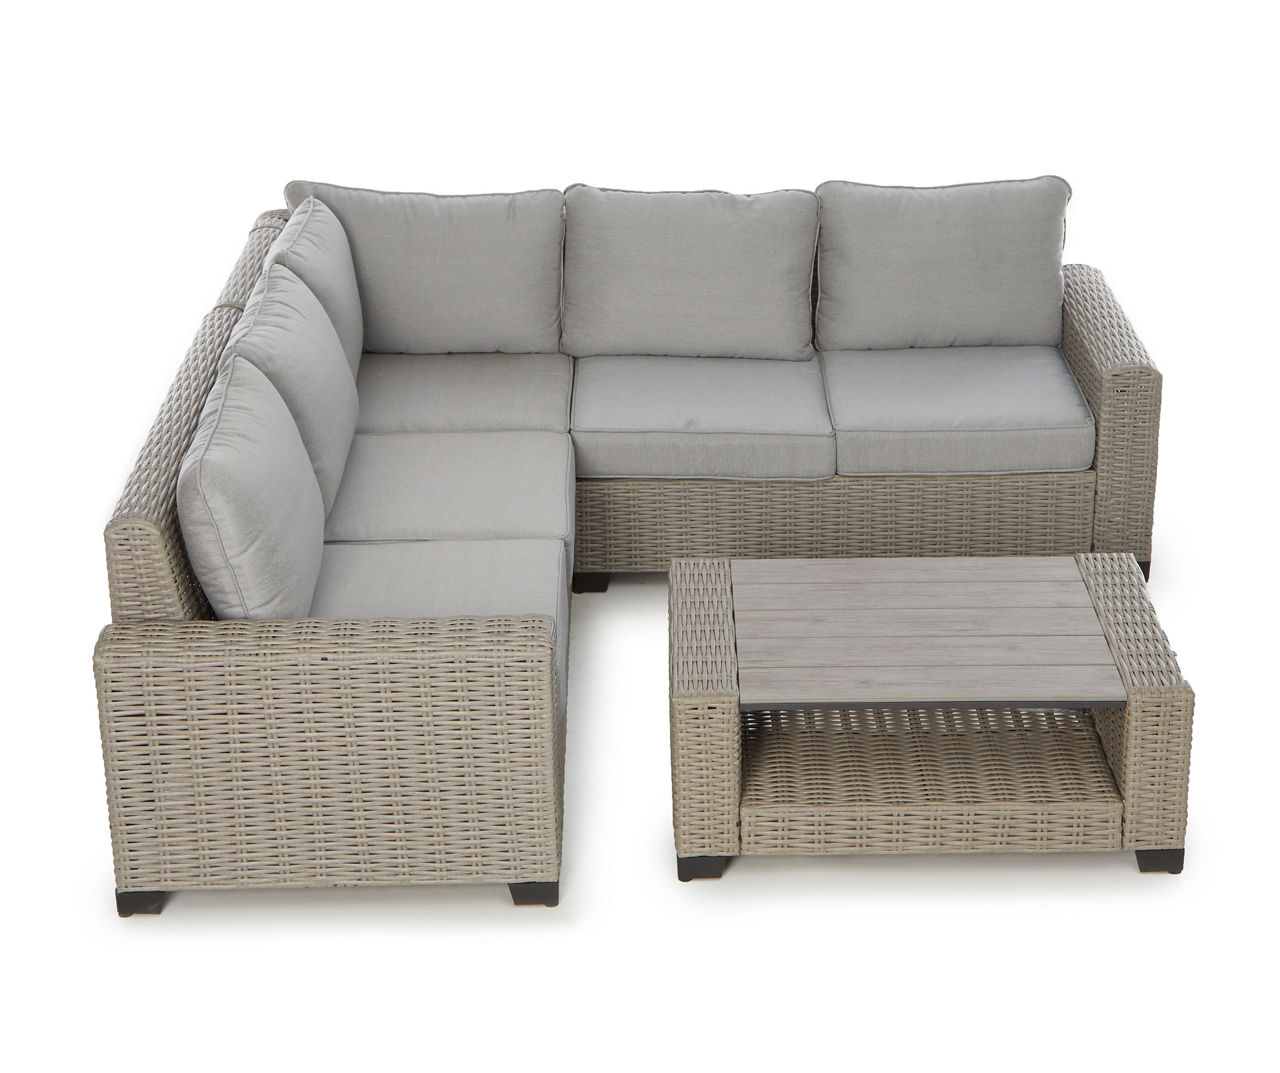 Pembroke Light All-Weather Wicker Cushioned Patio Sectional & Coffee Table Set